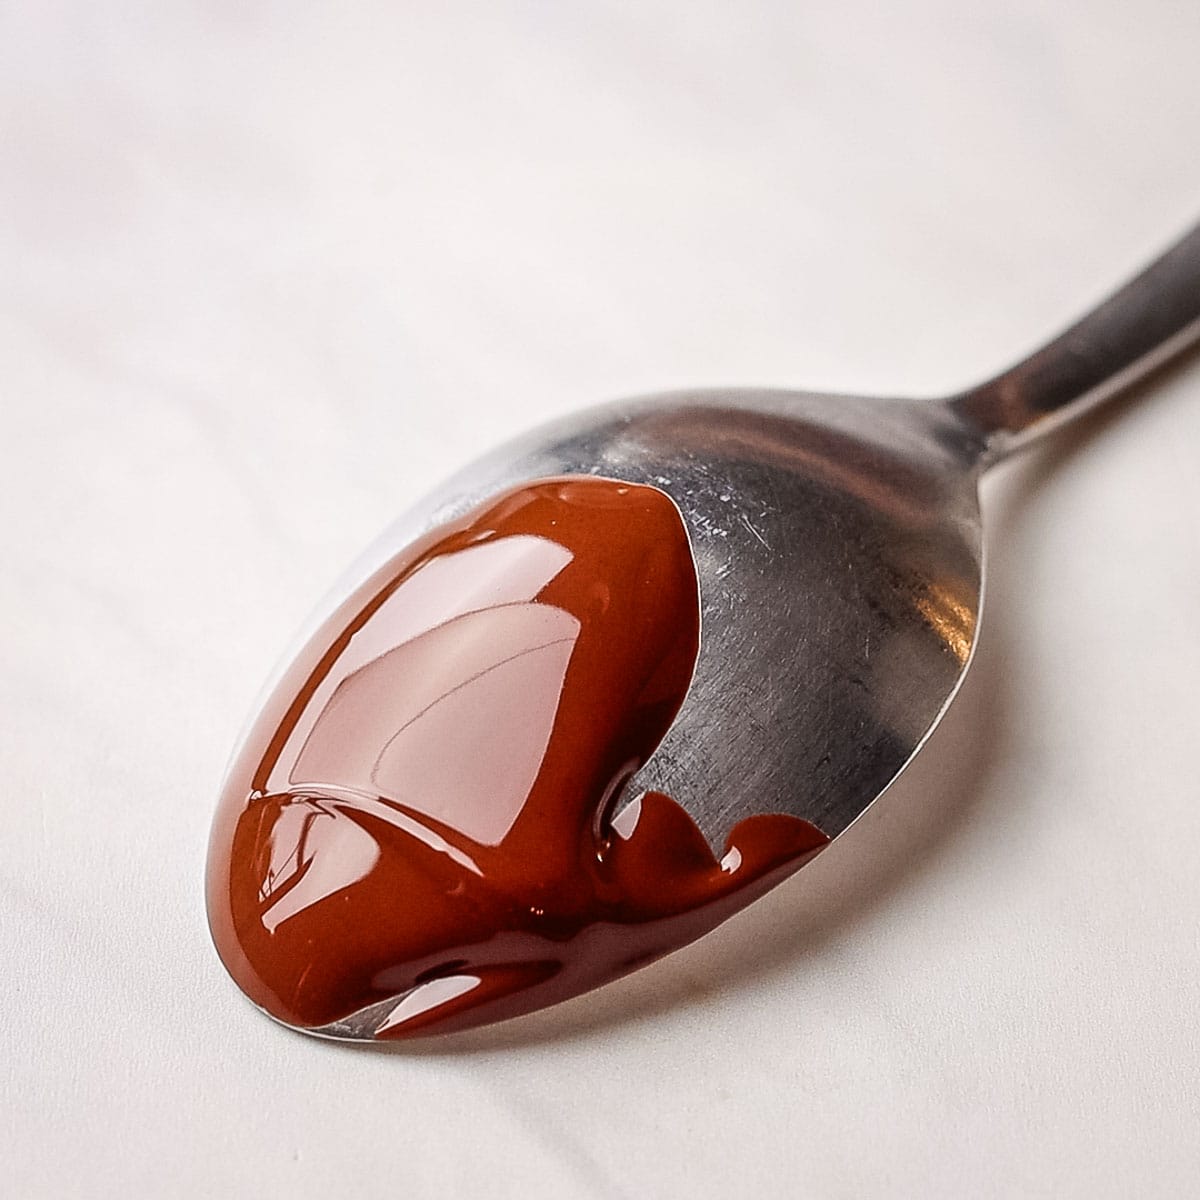 A spoon dipped in melted chocolate to test the temper.